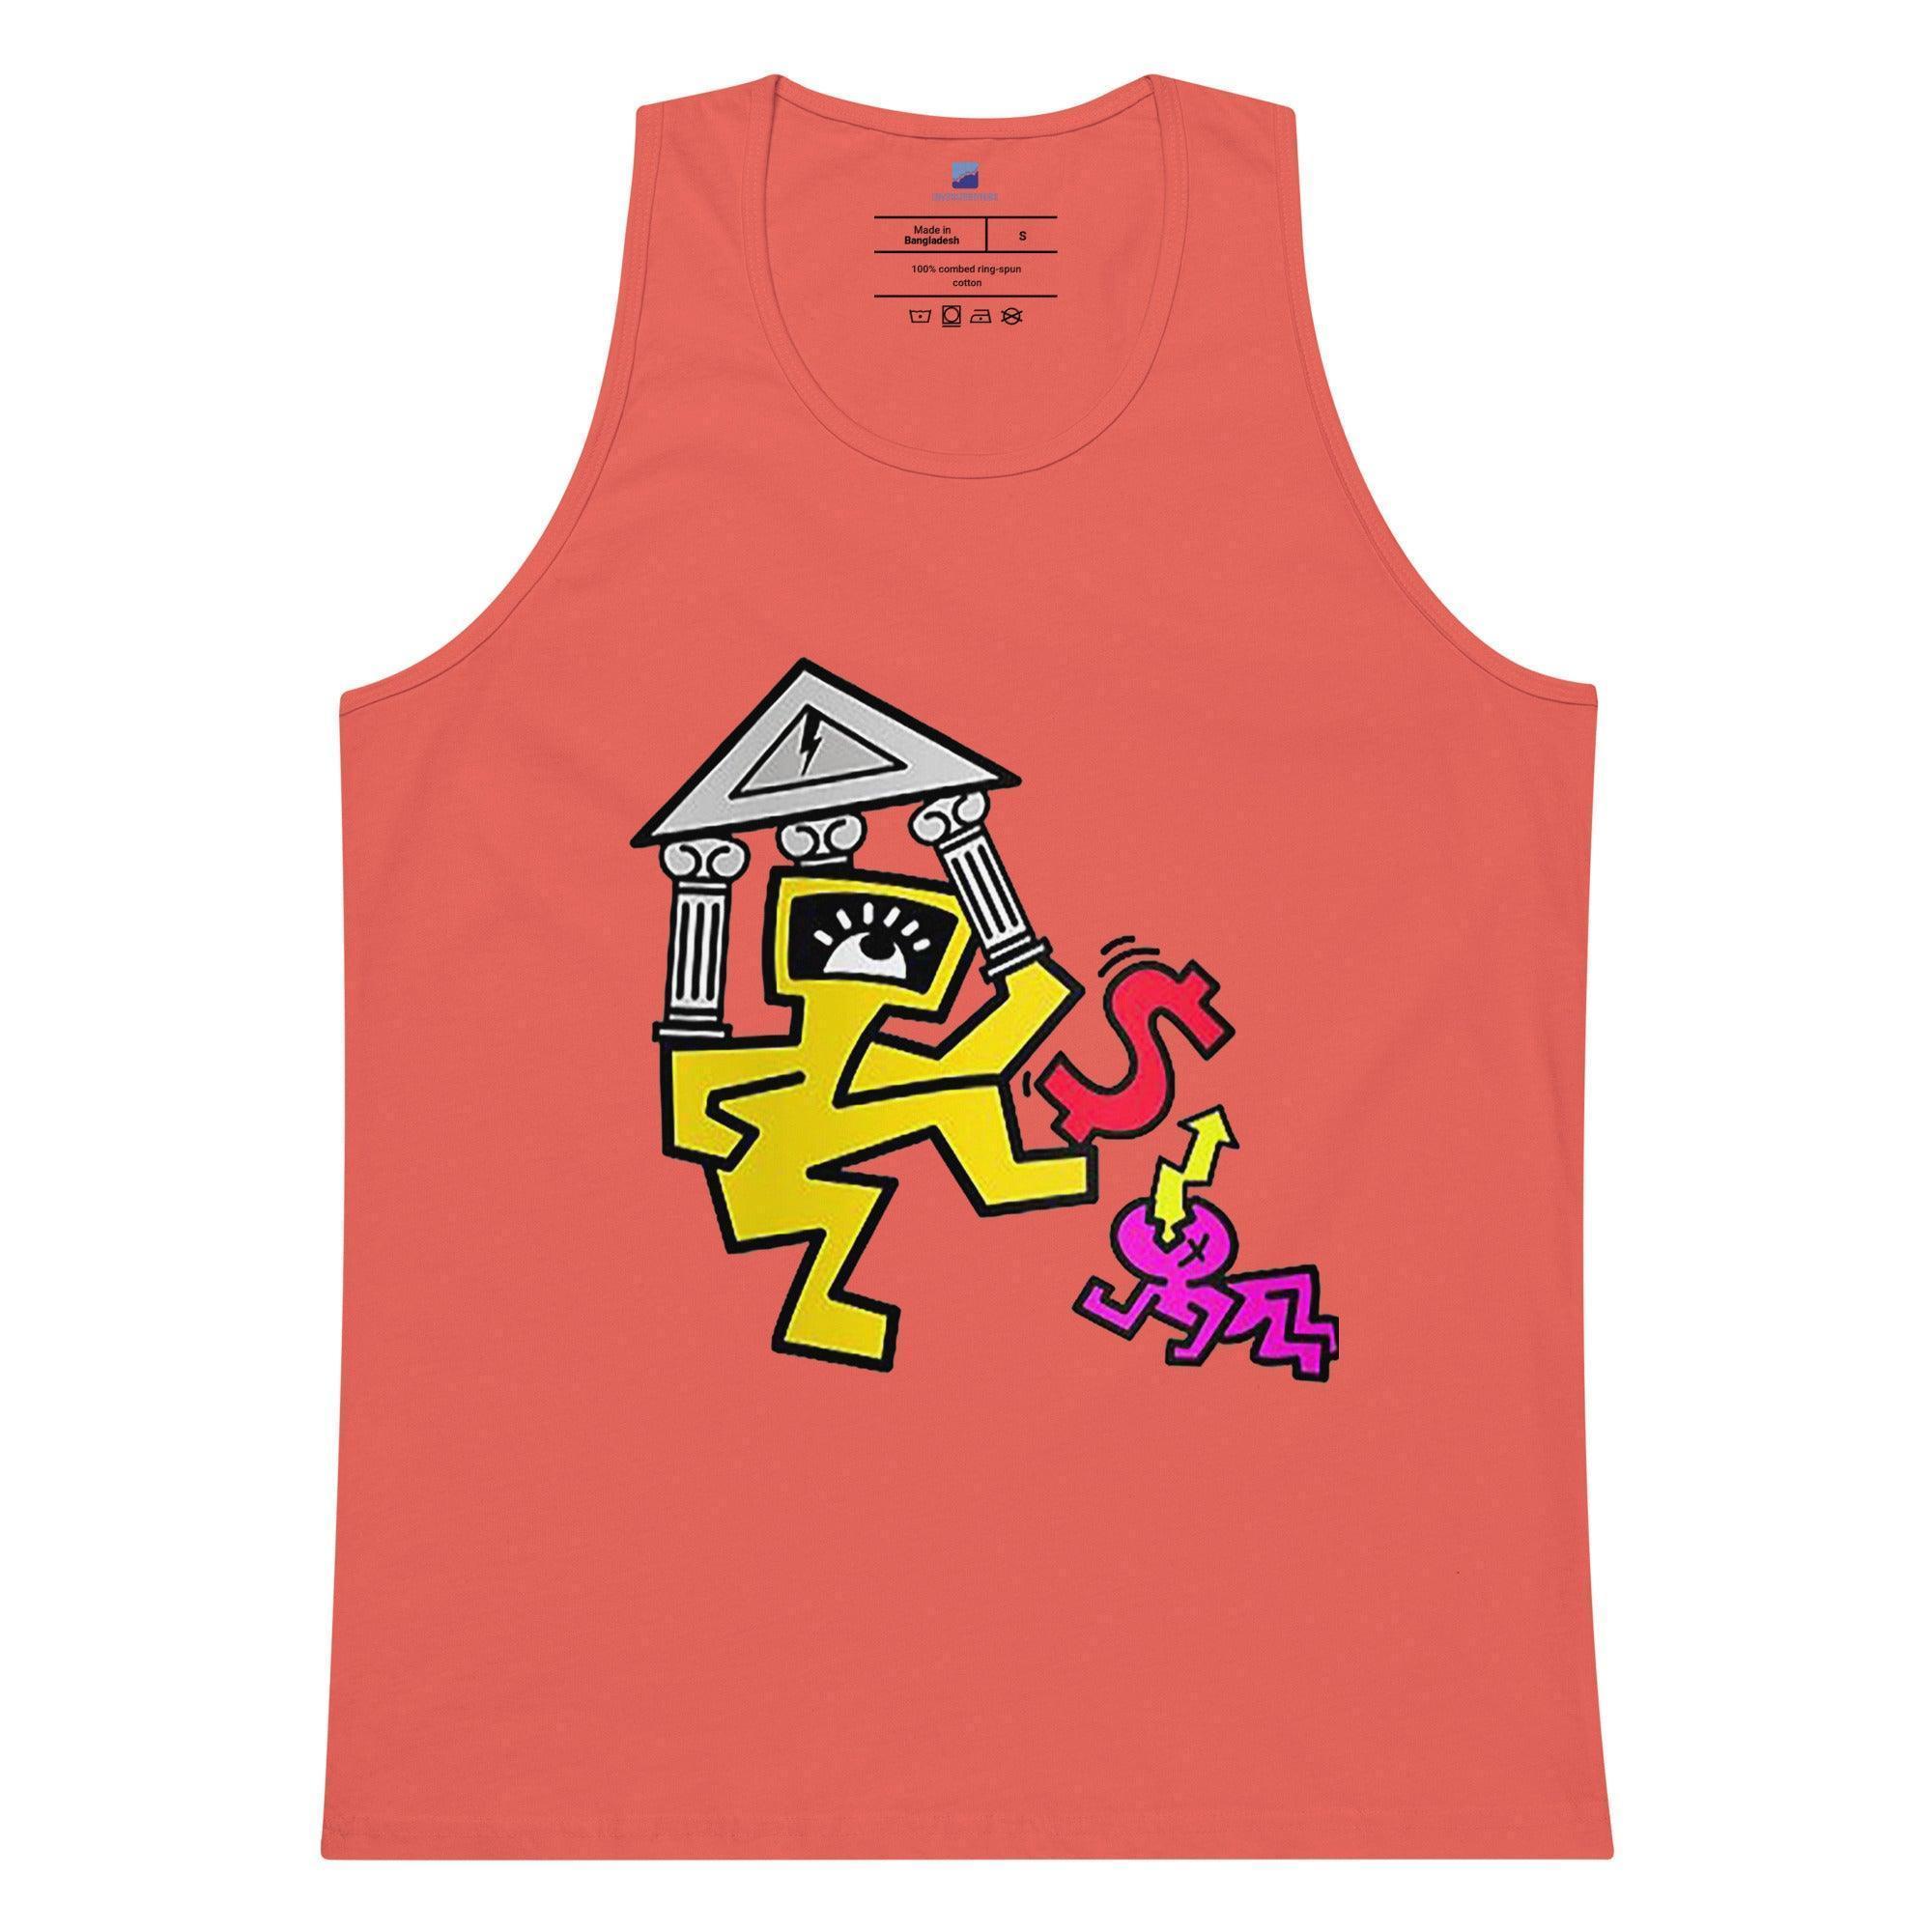 Banking Is Shaky Tank Top - InvestmenTees